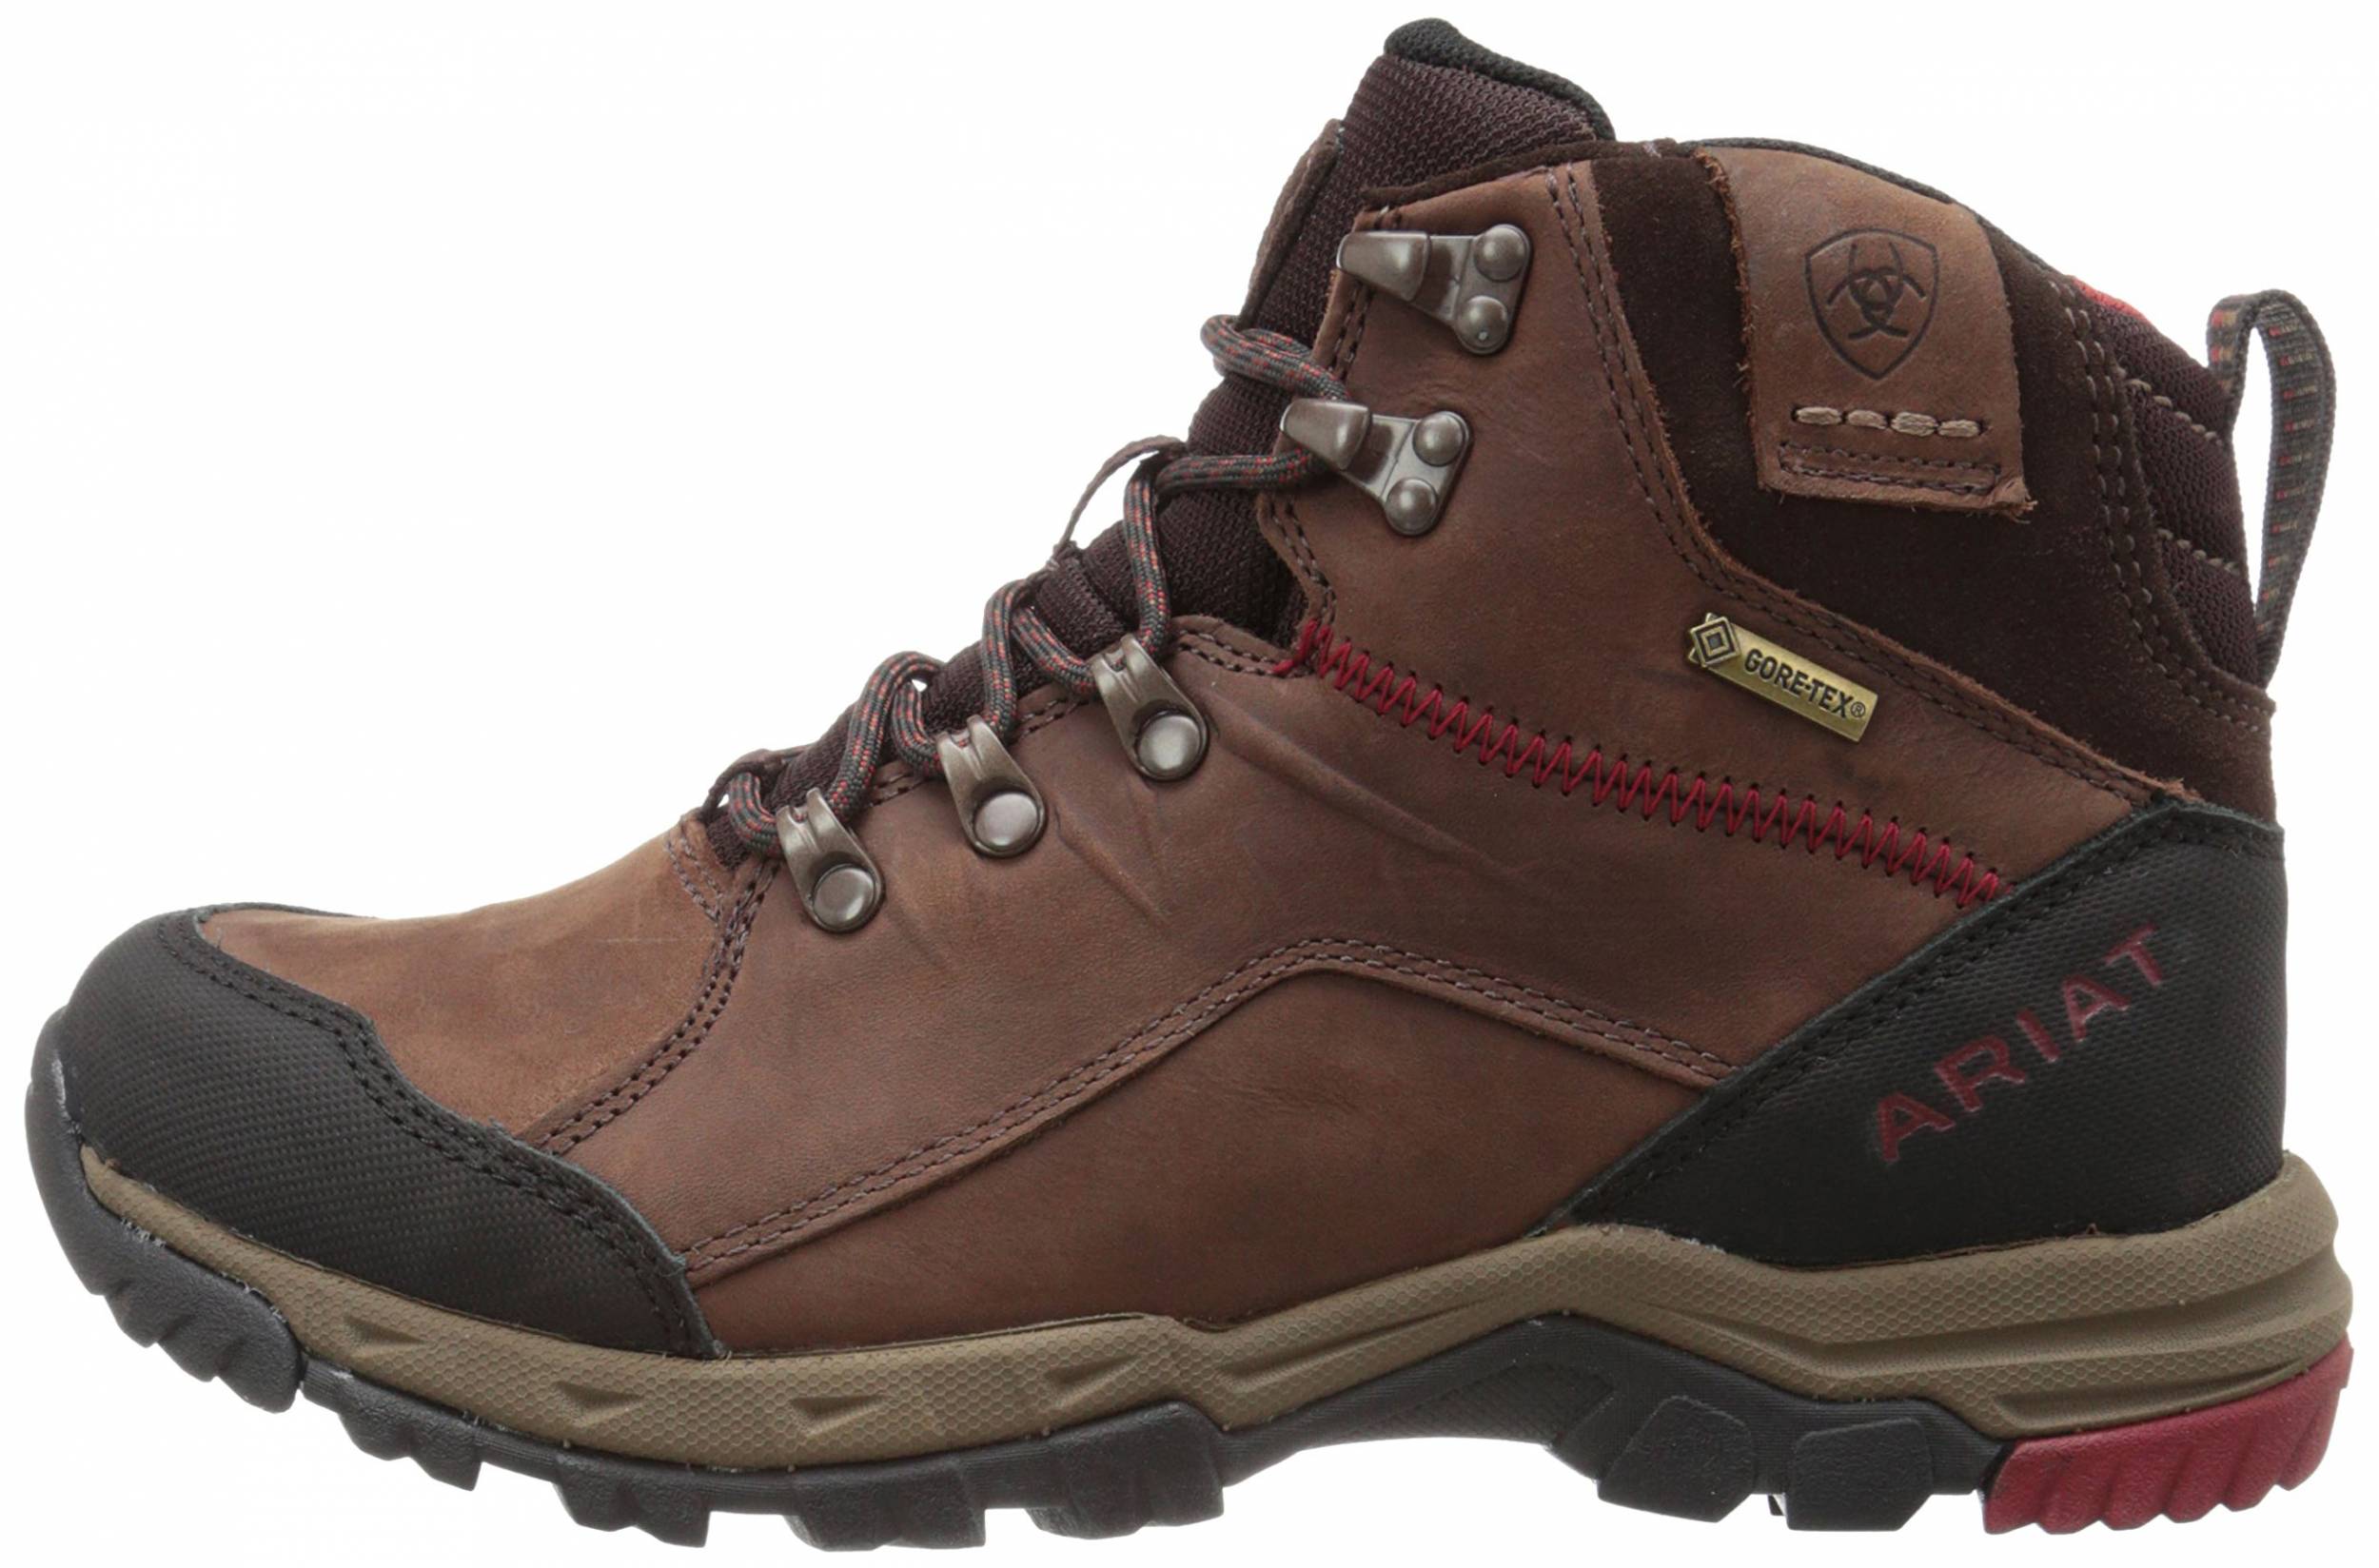 Save 18% on Ariat Hiking Boots (5 